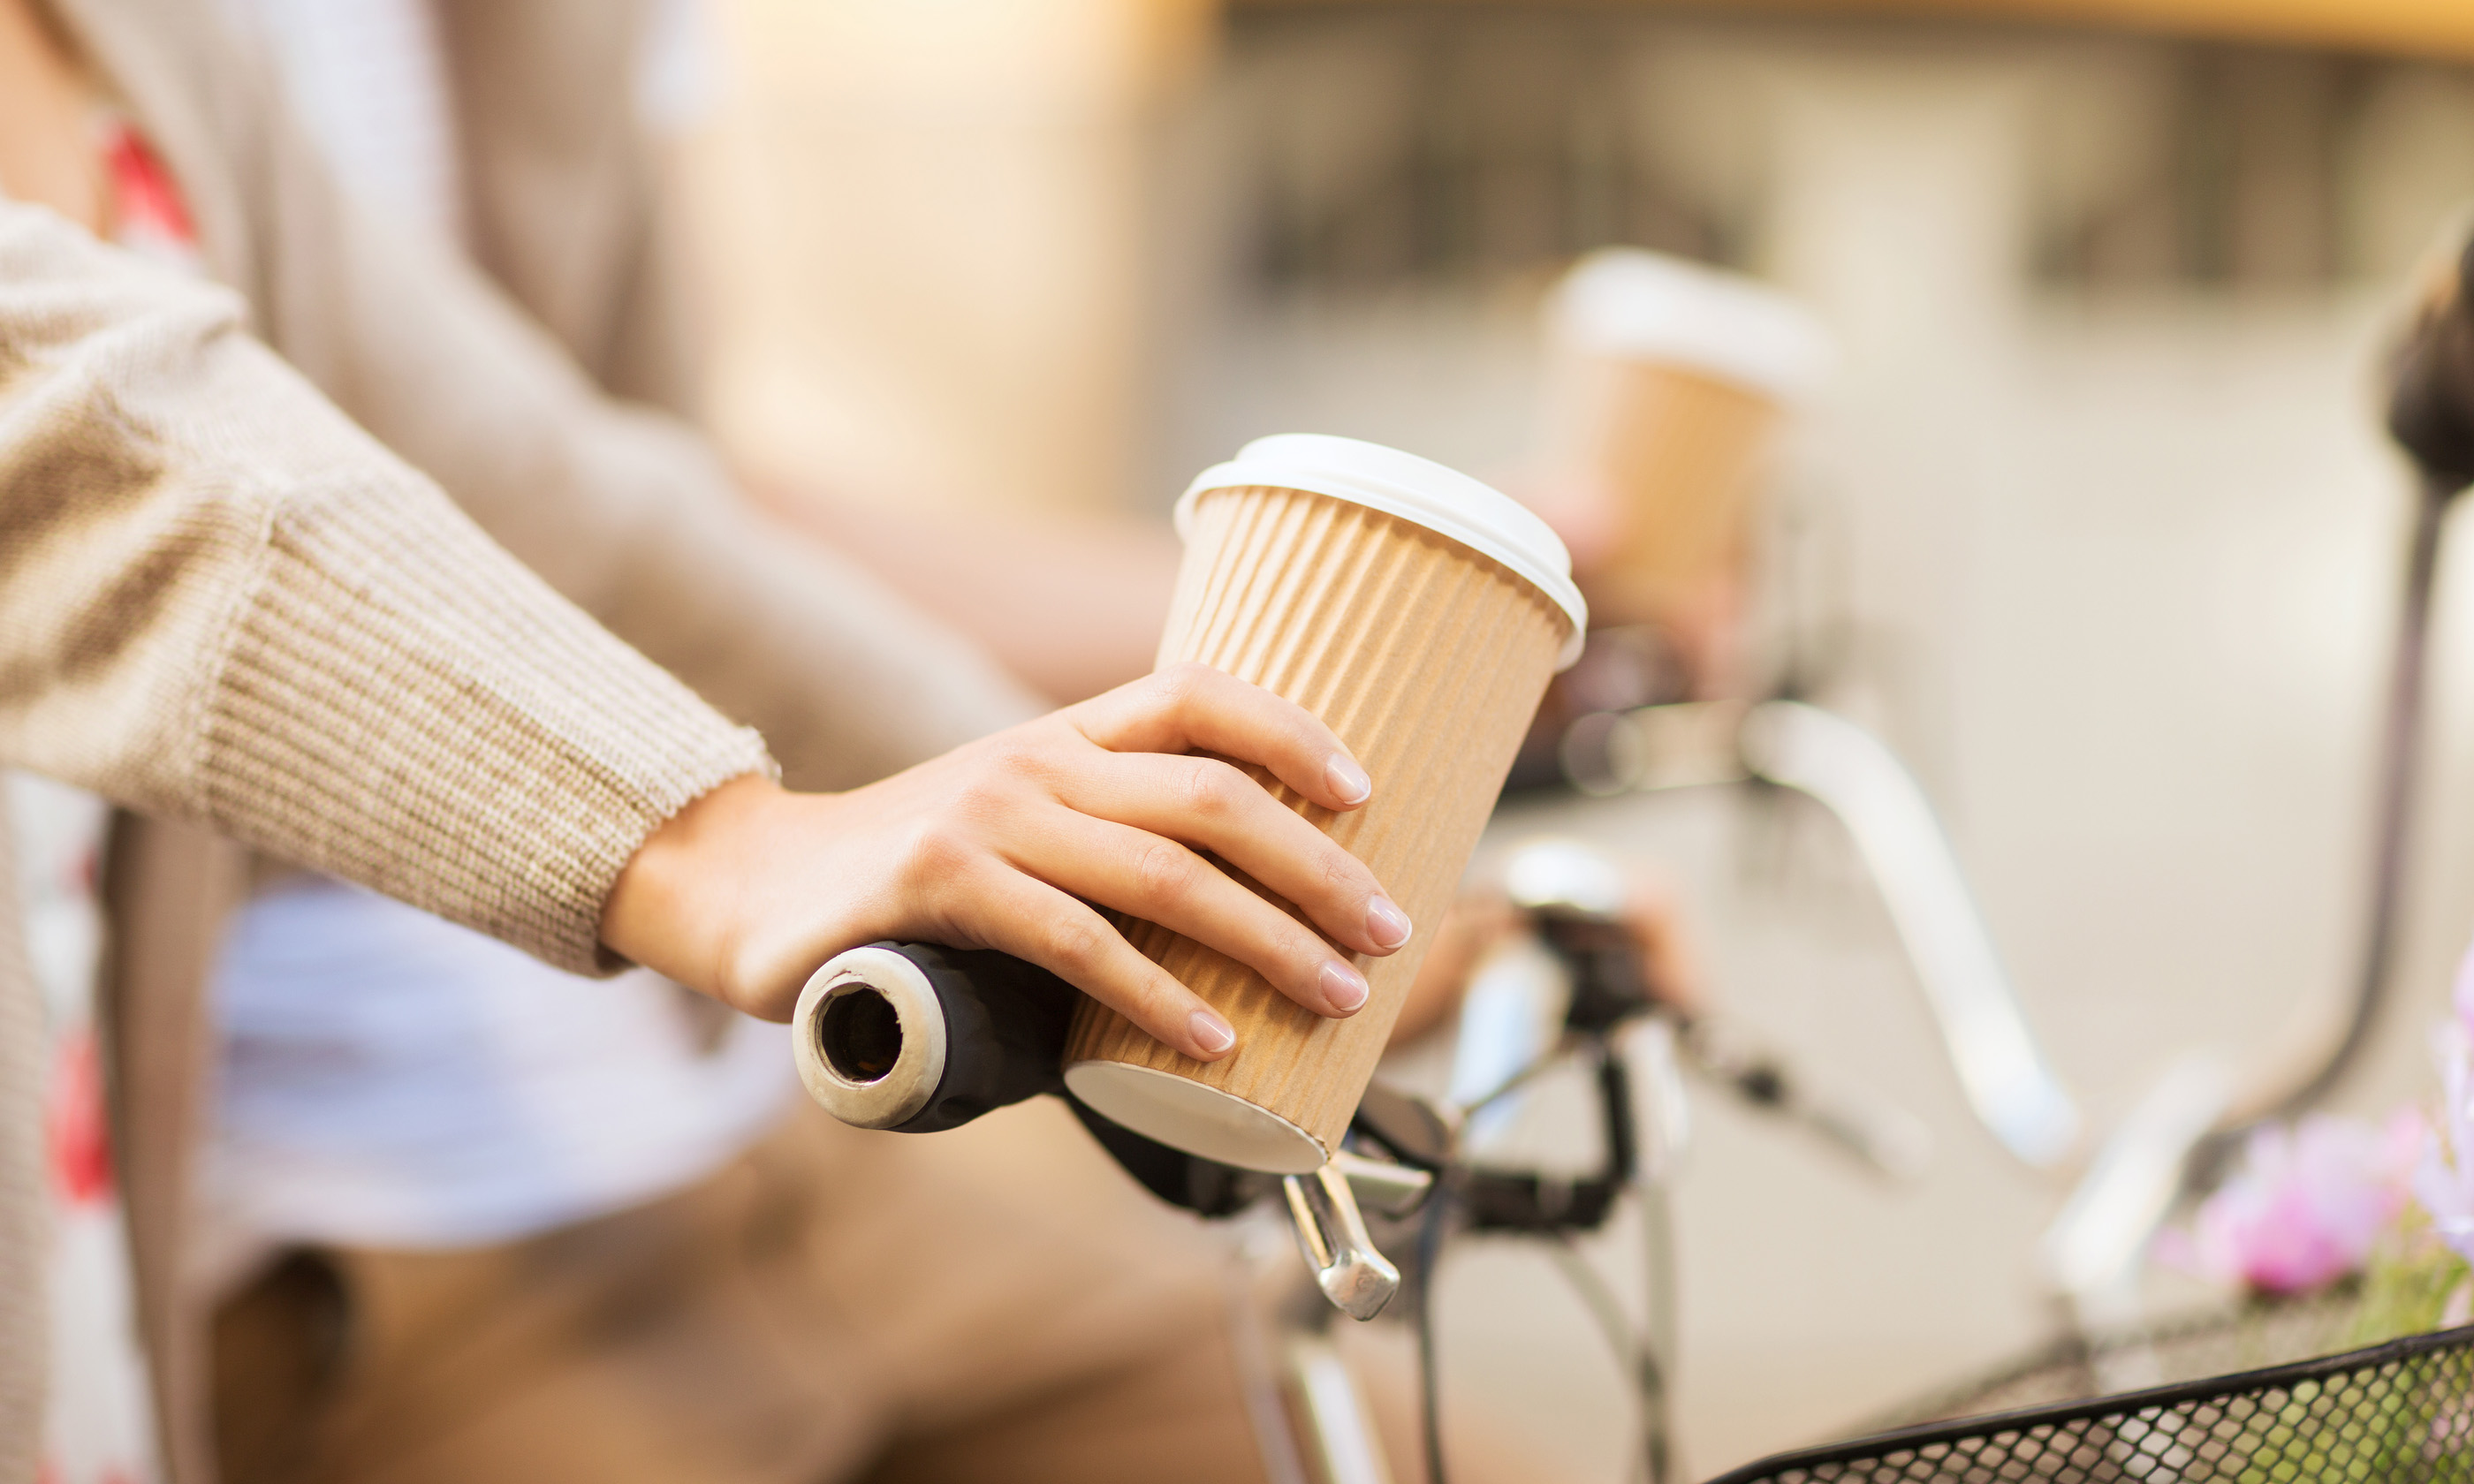 Coffee and cycling (Shutterstock: see main credit below)